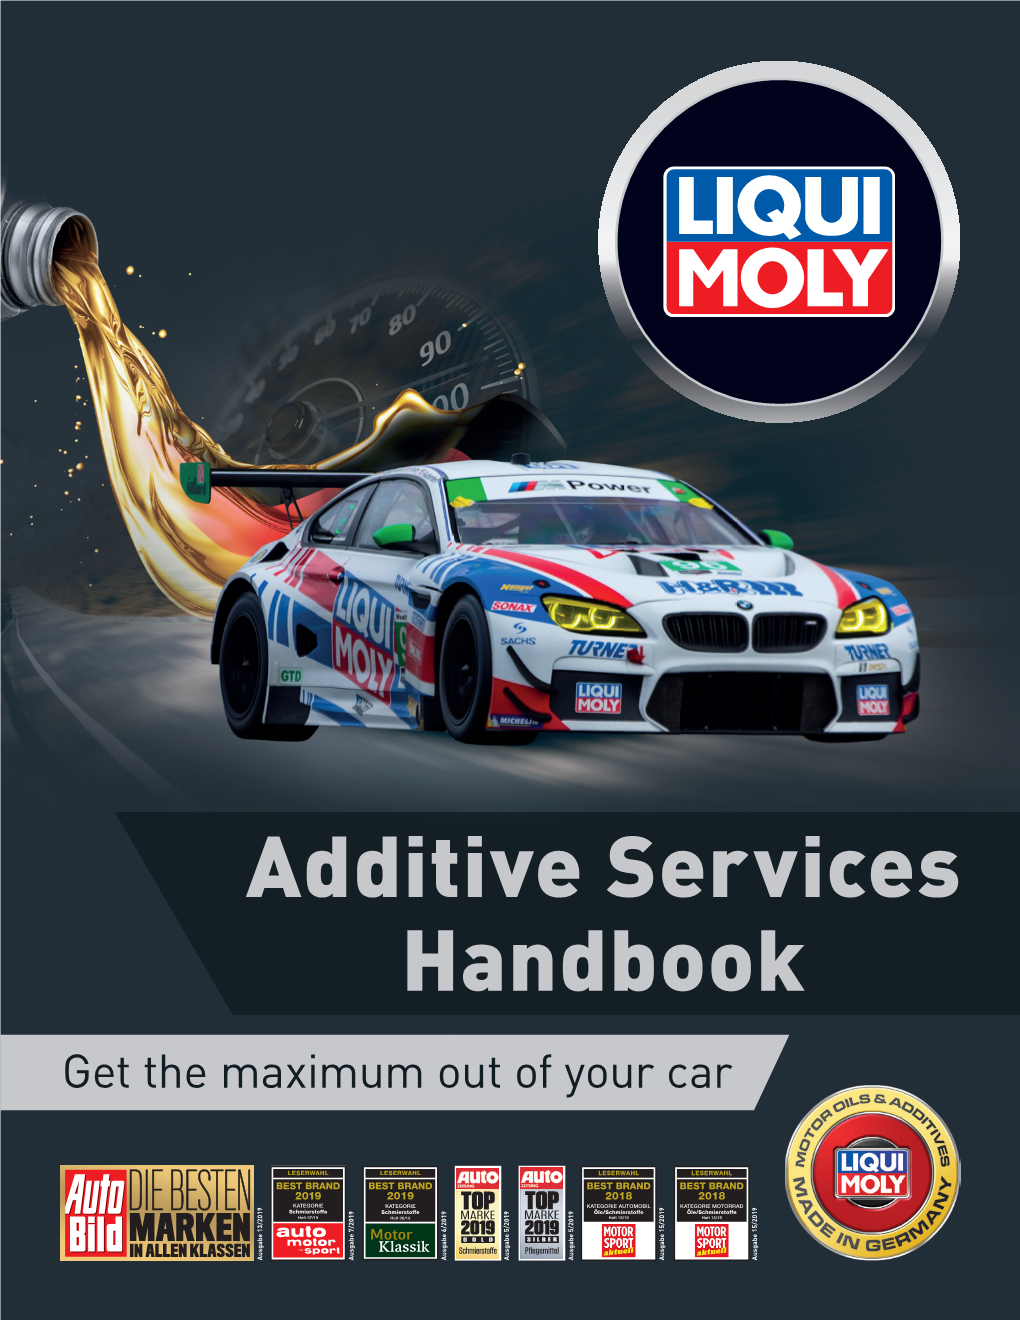 Additive Services Handbook Get the Maximum out of Your Car Reducing Or Eliminating Oil and Fuel Problems with LIQUI MOLY Products